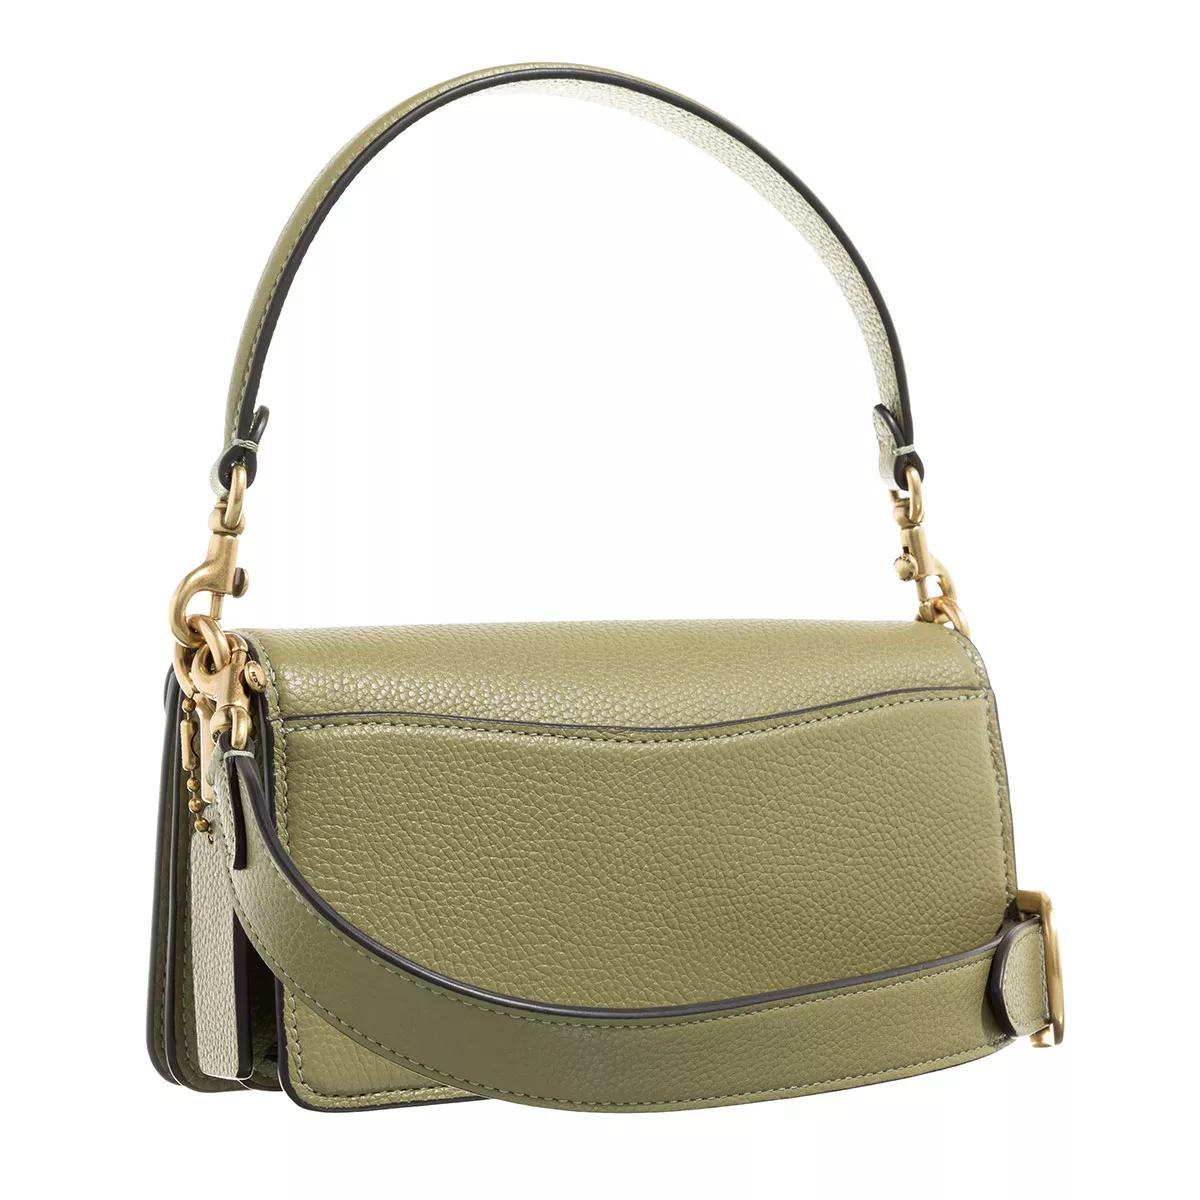 Coach Pochettes Polished Pebble Leather Tabby Shoulder Bag in groen